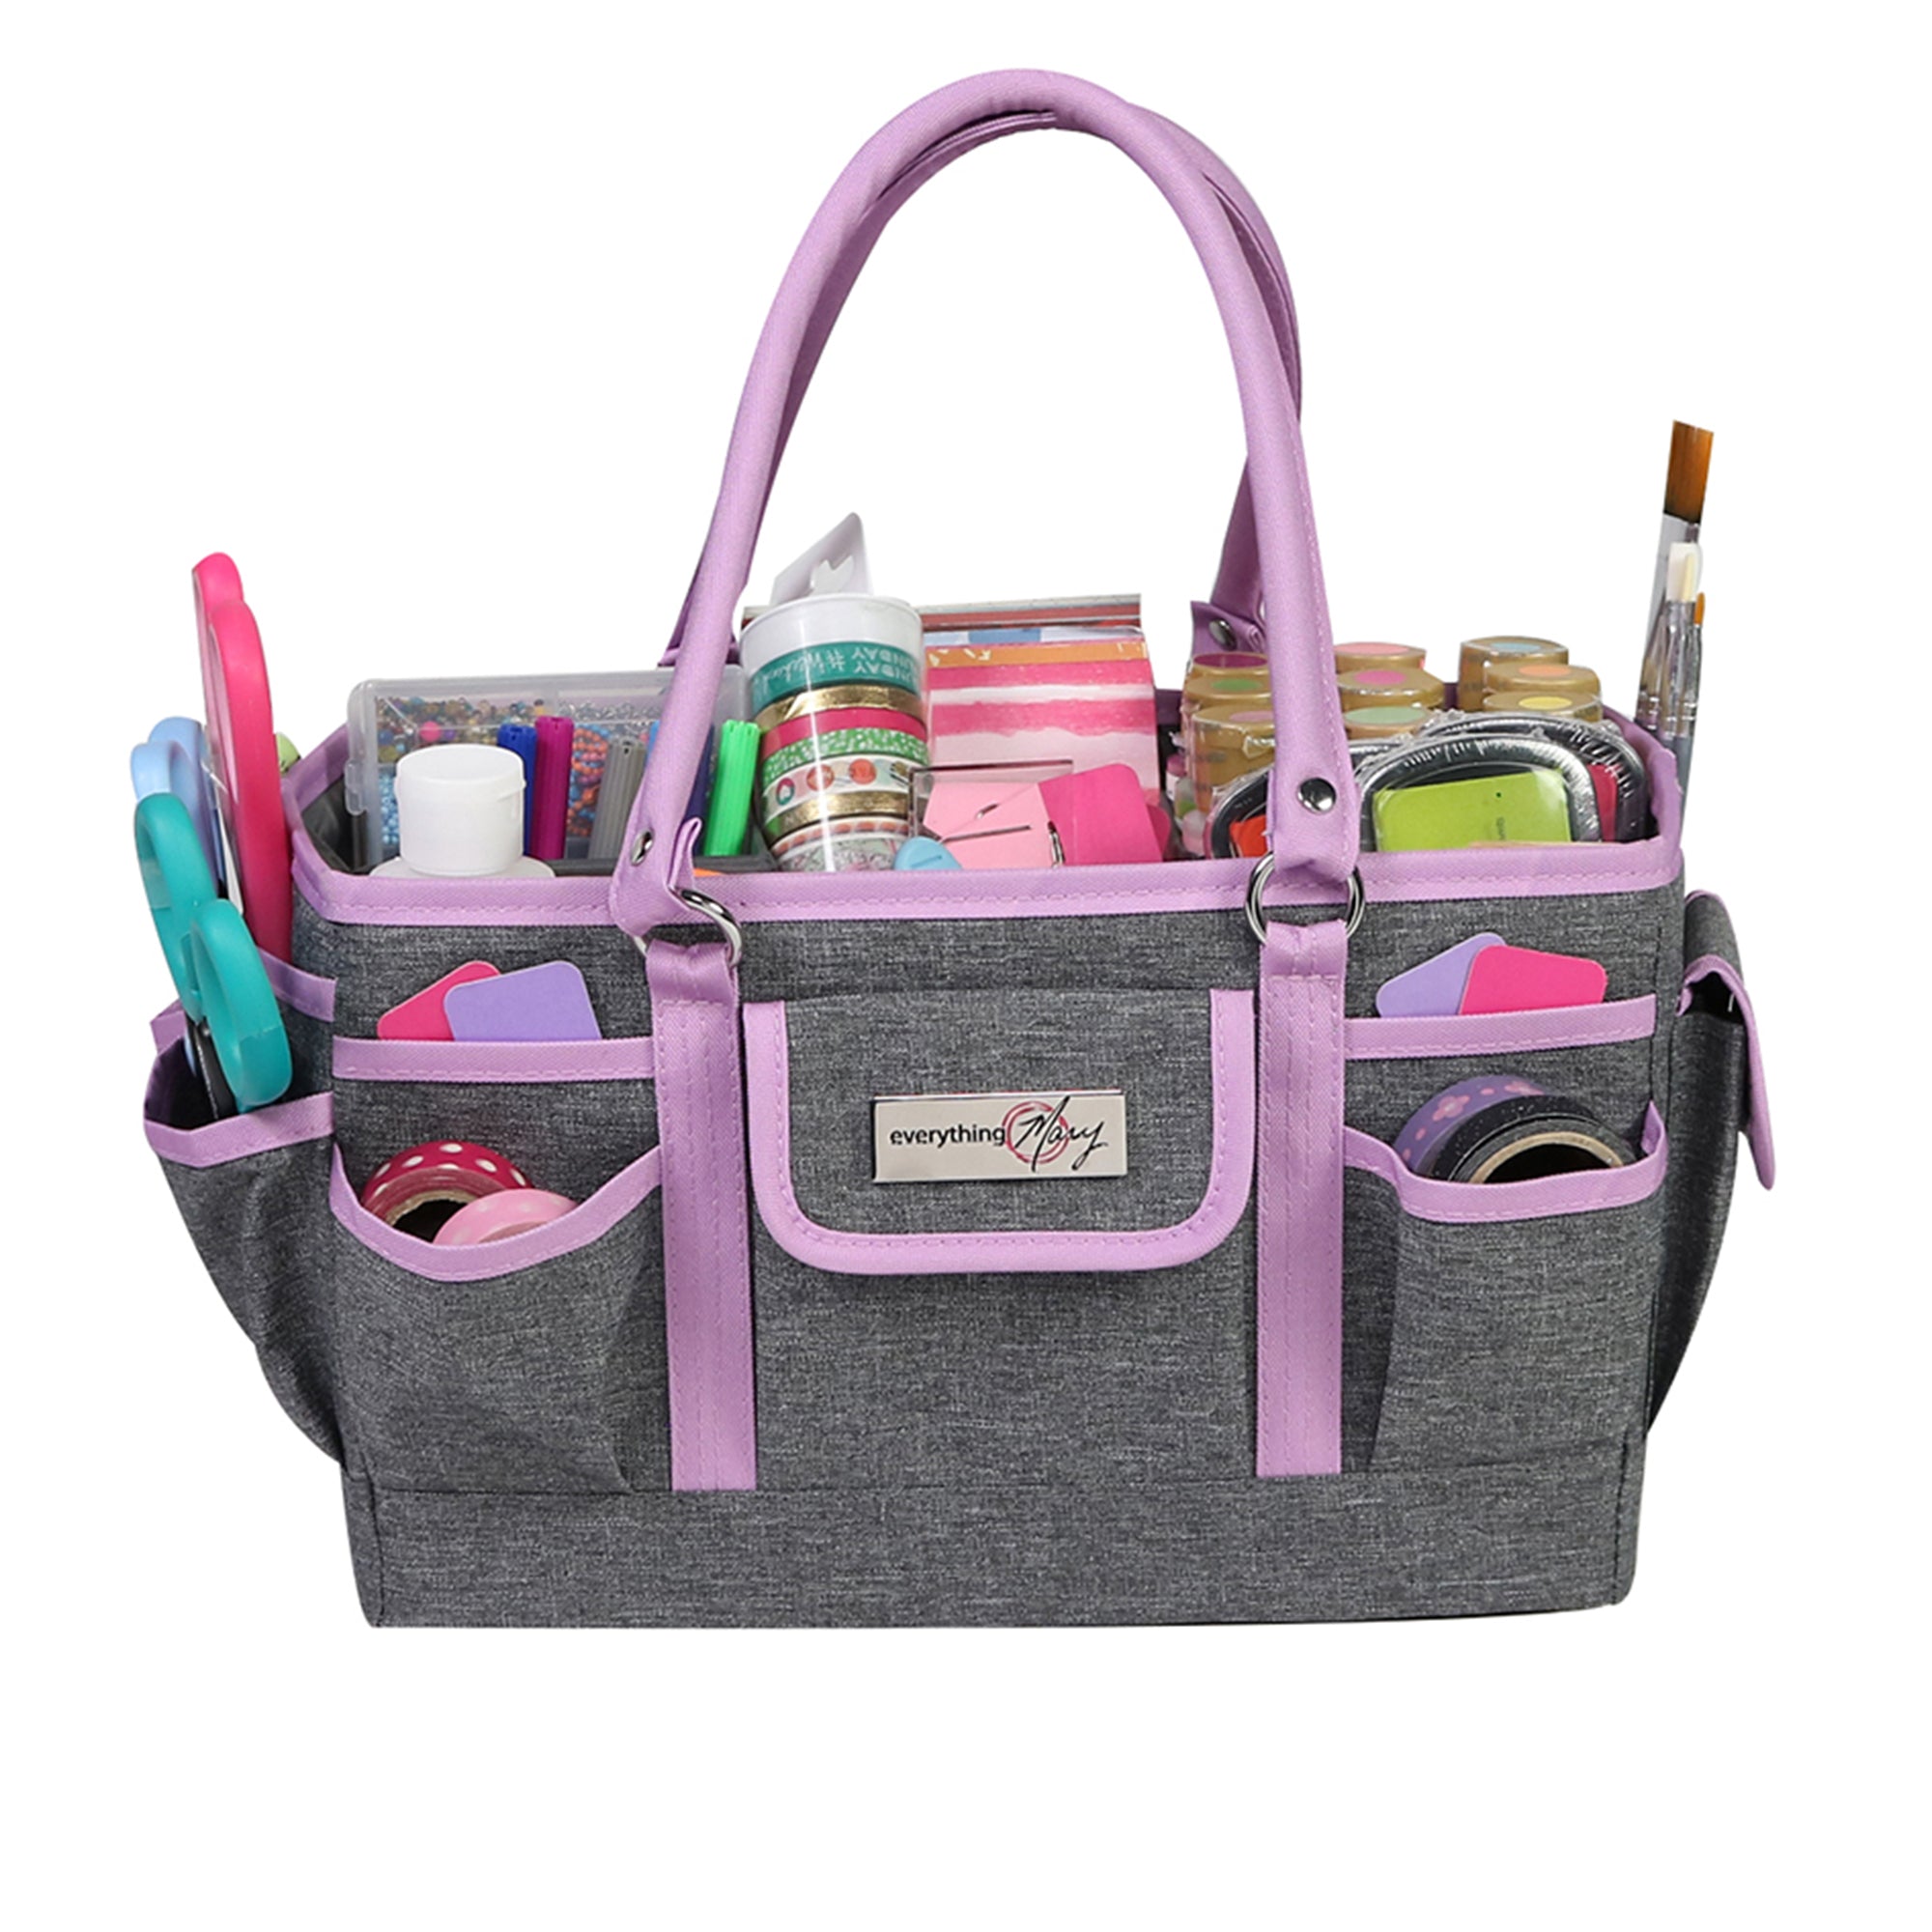 Everything Mary Craft Bag Organizer Tote, Color – Storage Art